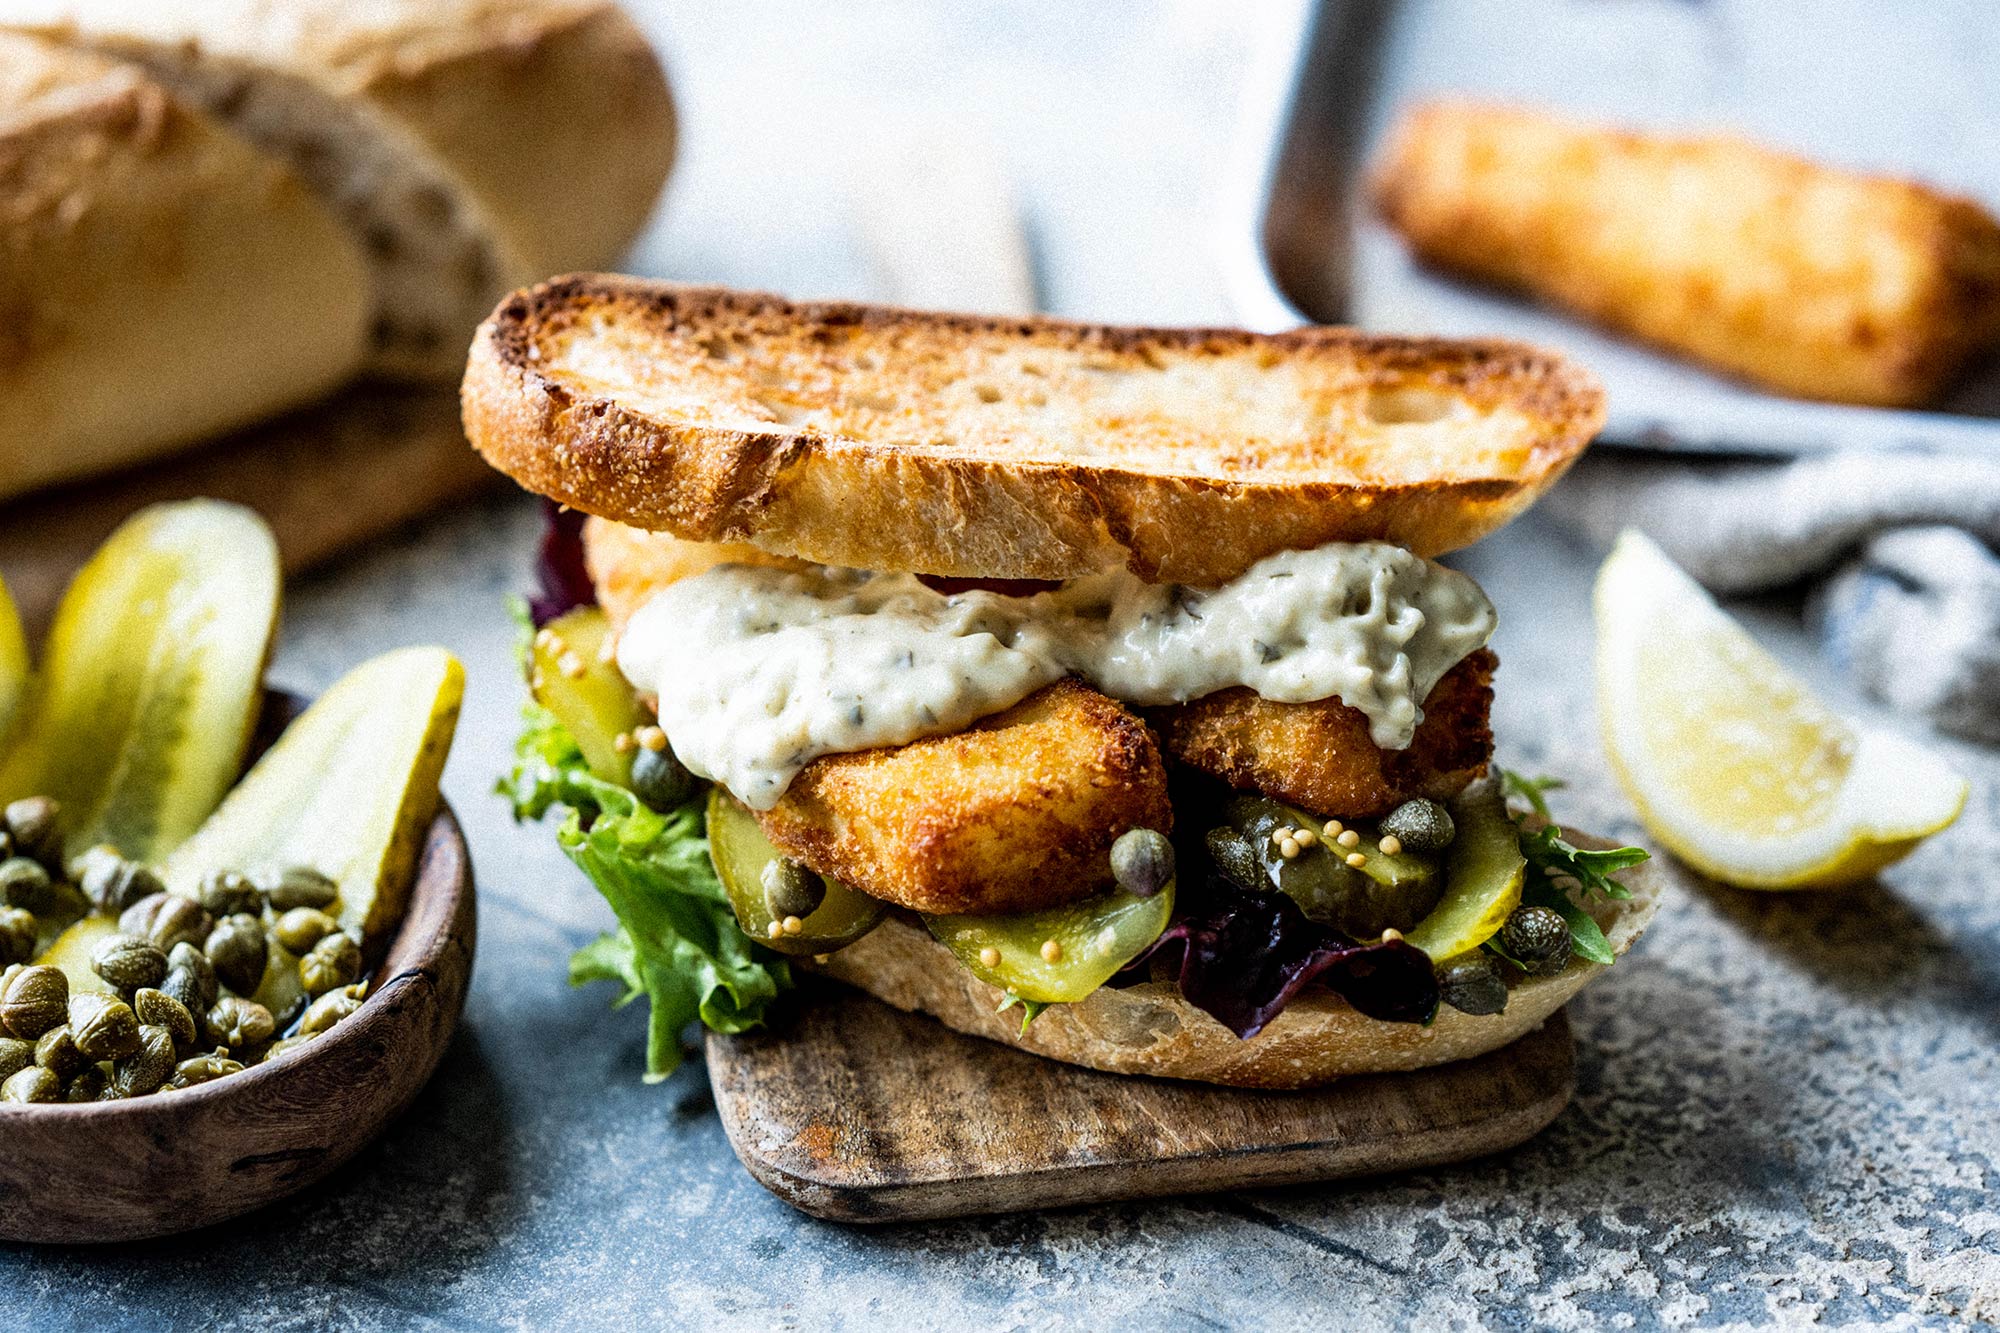 Gourmet Fish Finger Sandwich Recipe - Wright Brothers Home Delivery